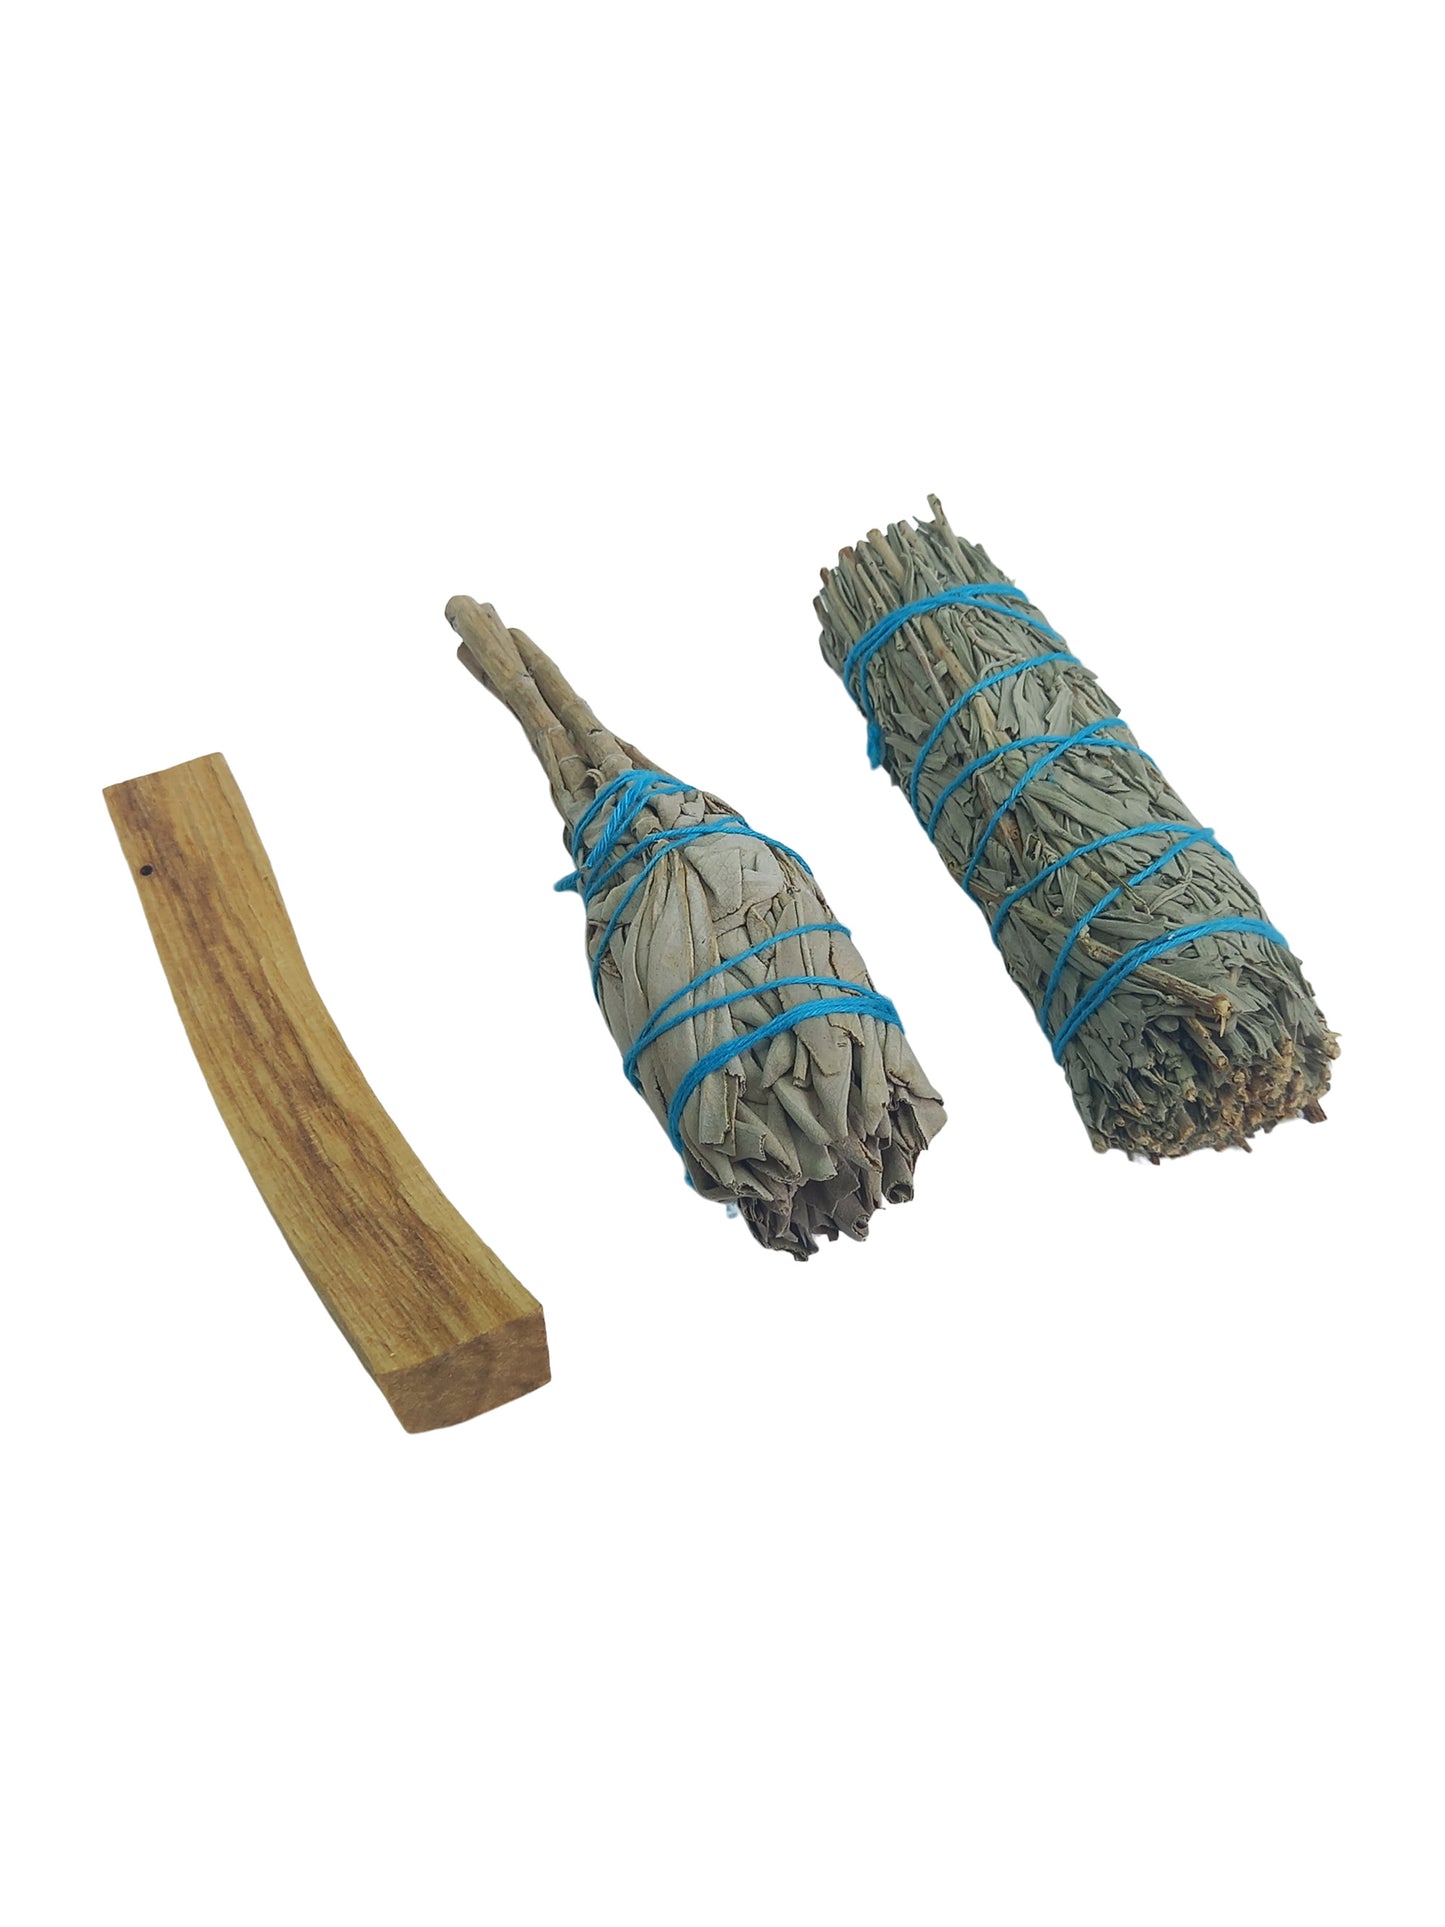 Californian White Sage, Blue Sage Smudge Sticks and a Palo Santo stick Mixed Collection